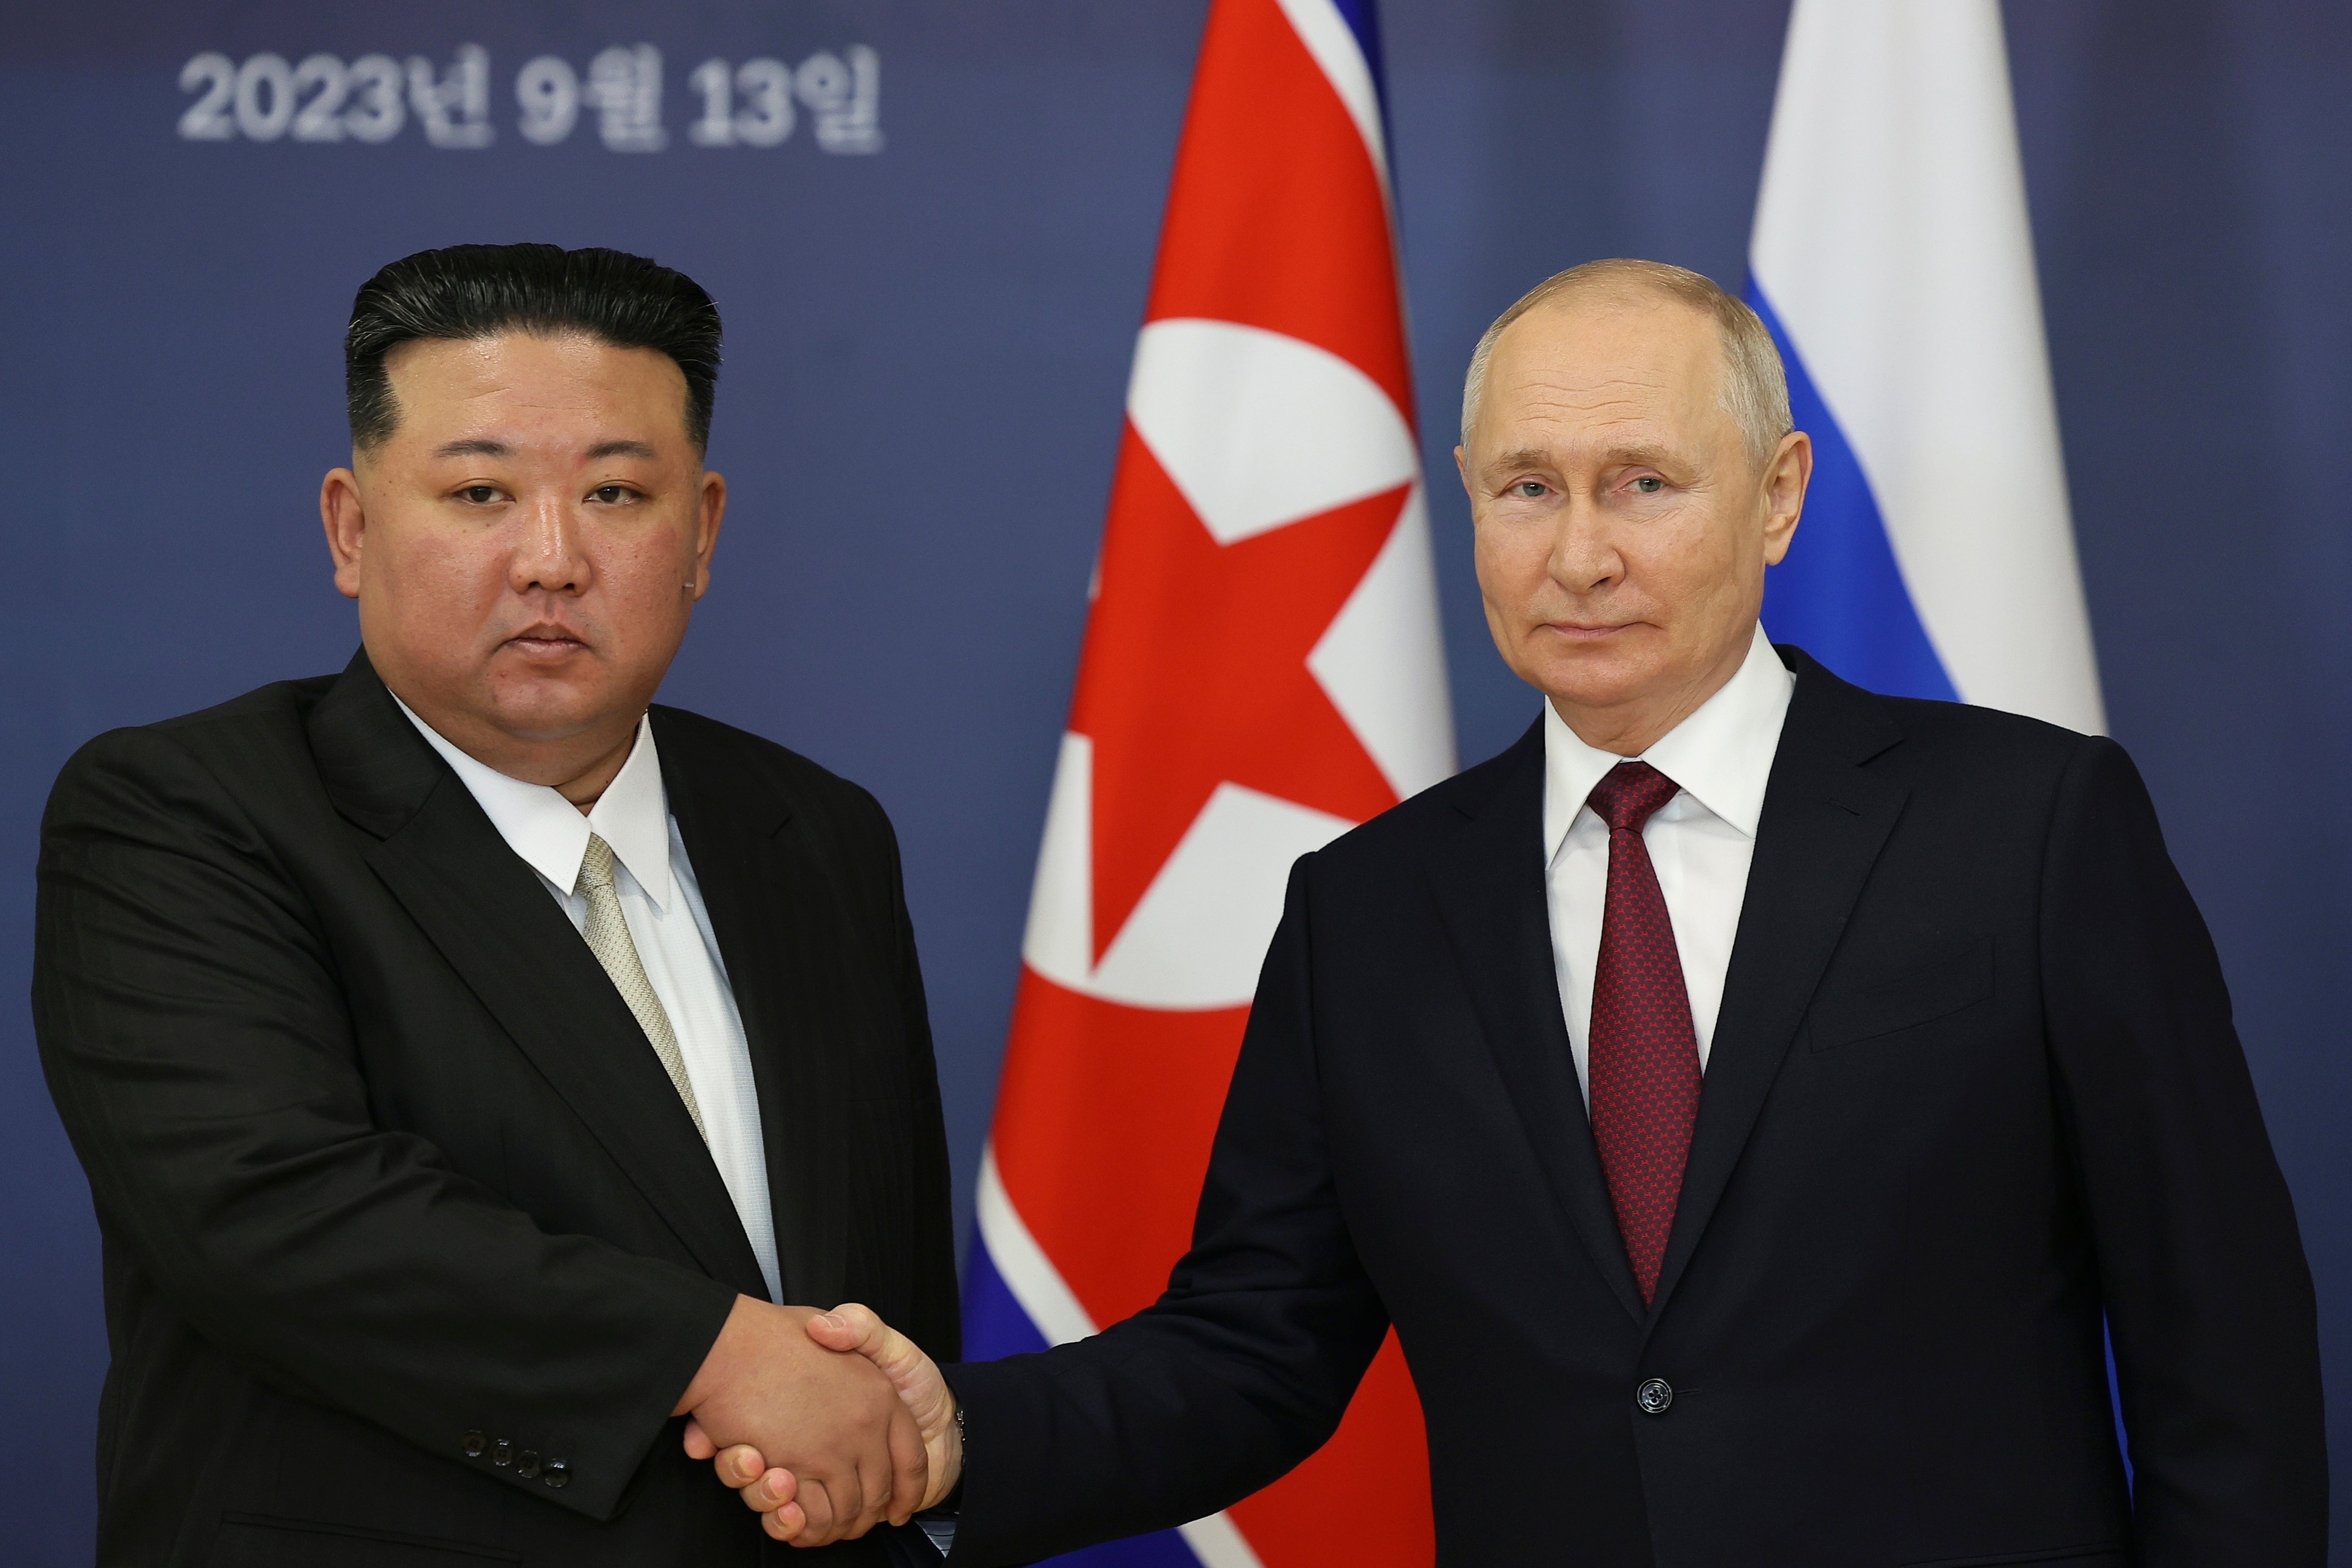 North Korea’s leader Kim Jong-un with Russian president Vladimir Putin during their 2023 meeting at the Vostochny Cosmodrome